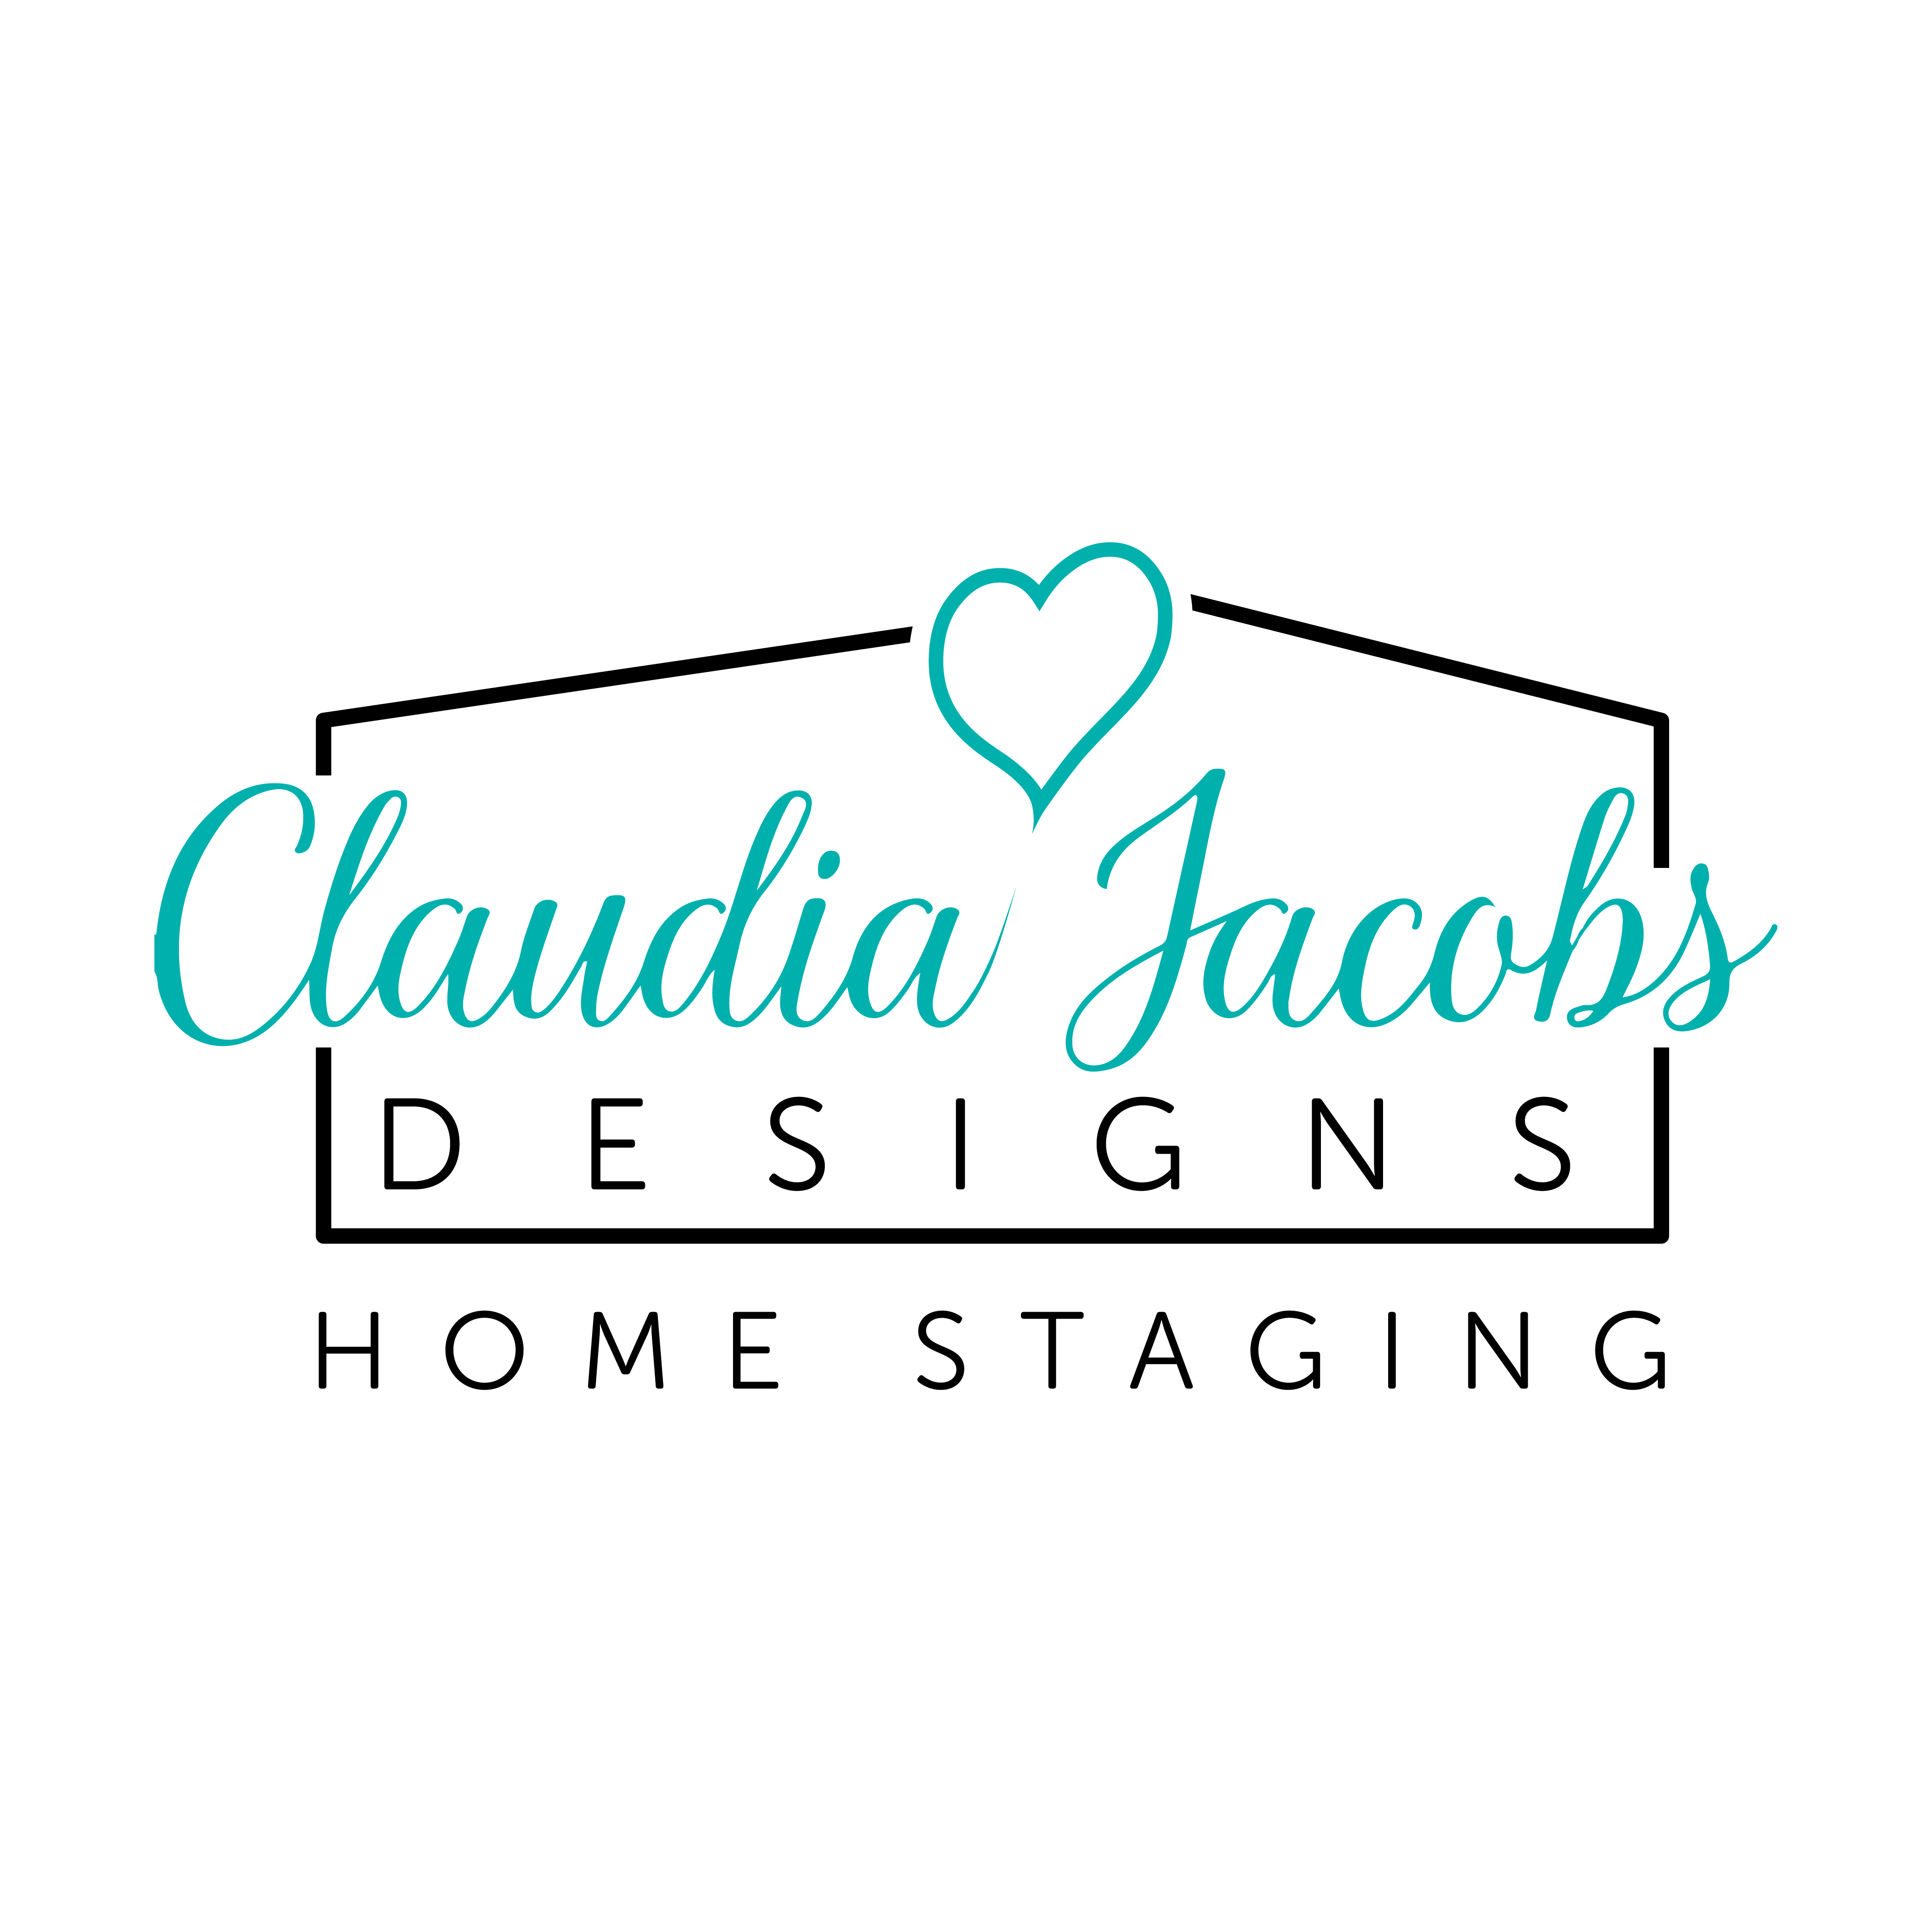 Claudia Jacobs Designs Home Staging Logo links to case study